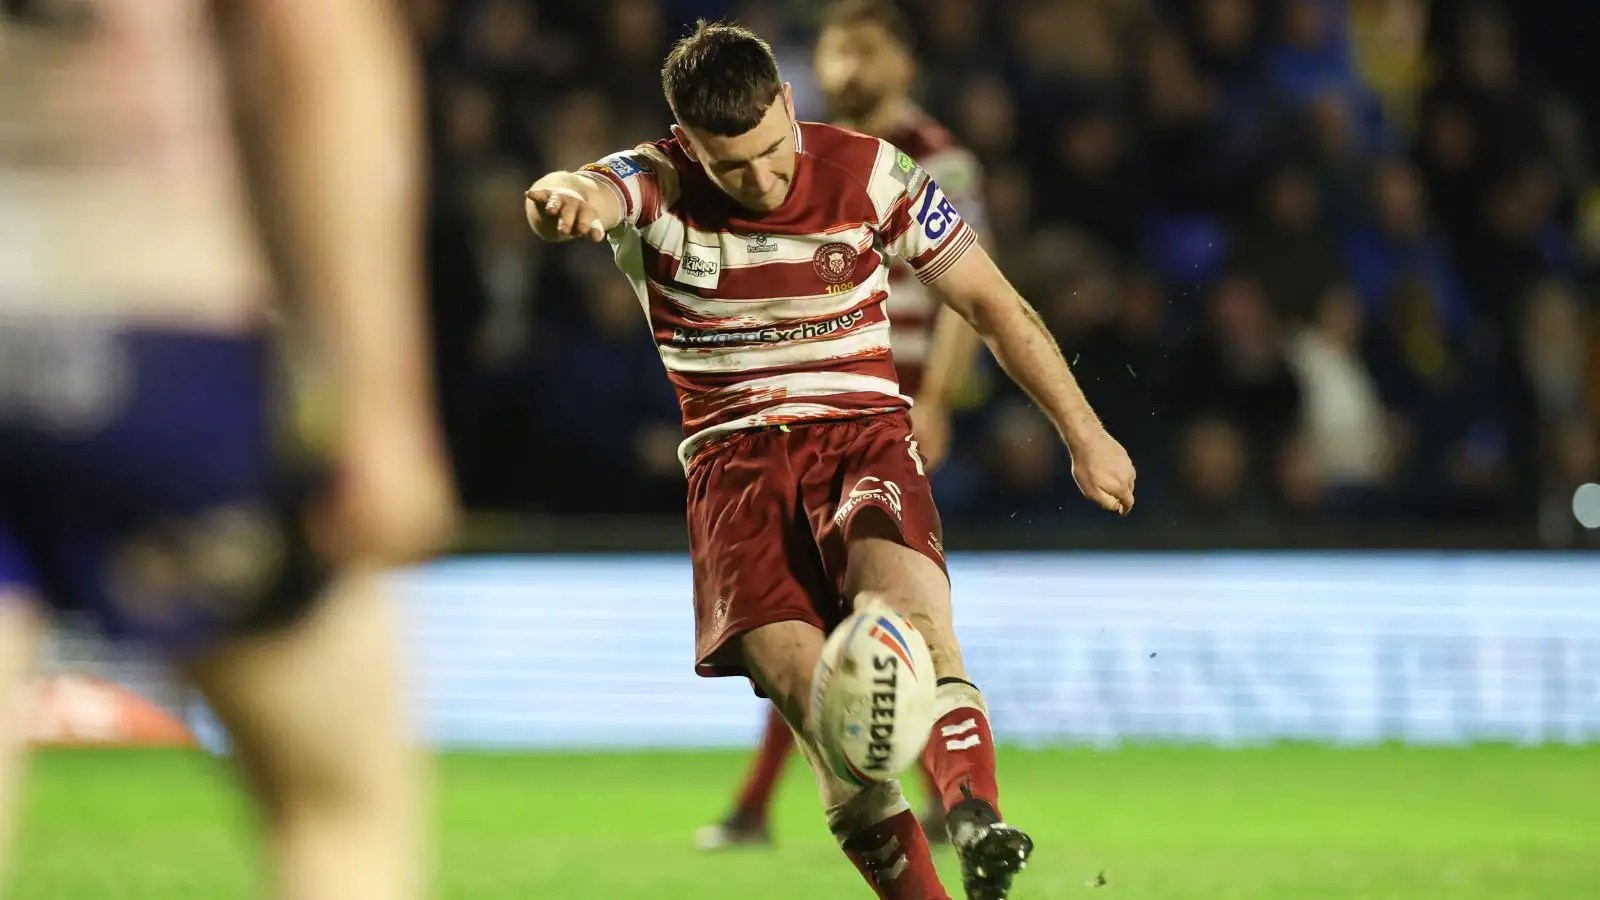 Harry Smith gives Shaun Wane selection headaches with another stellar performance